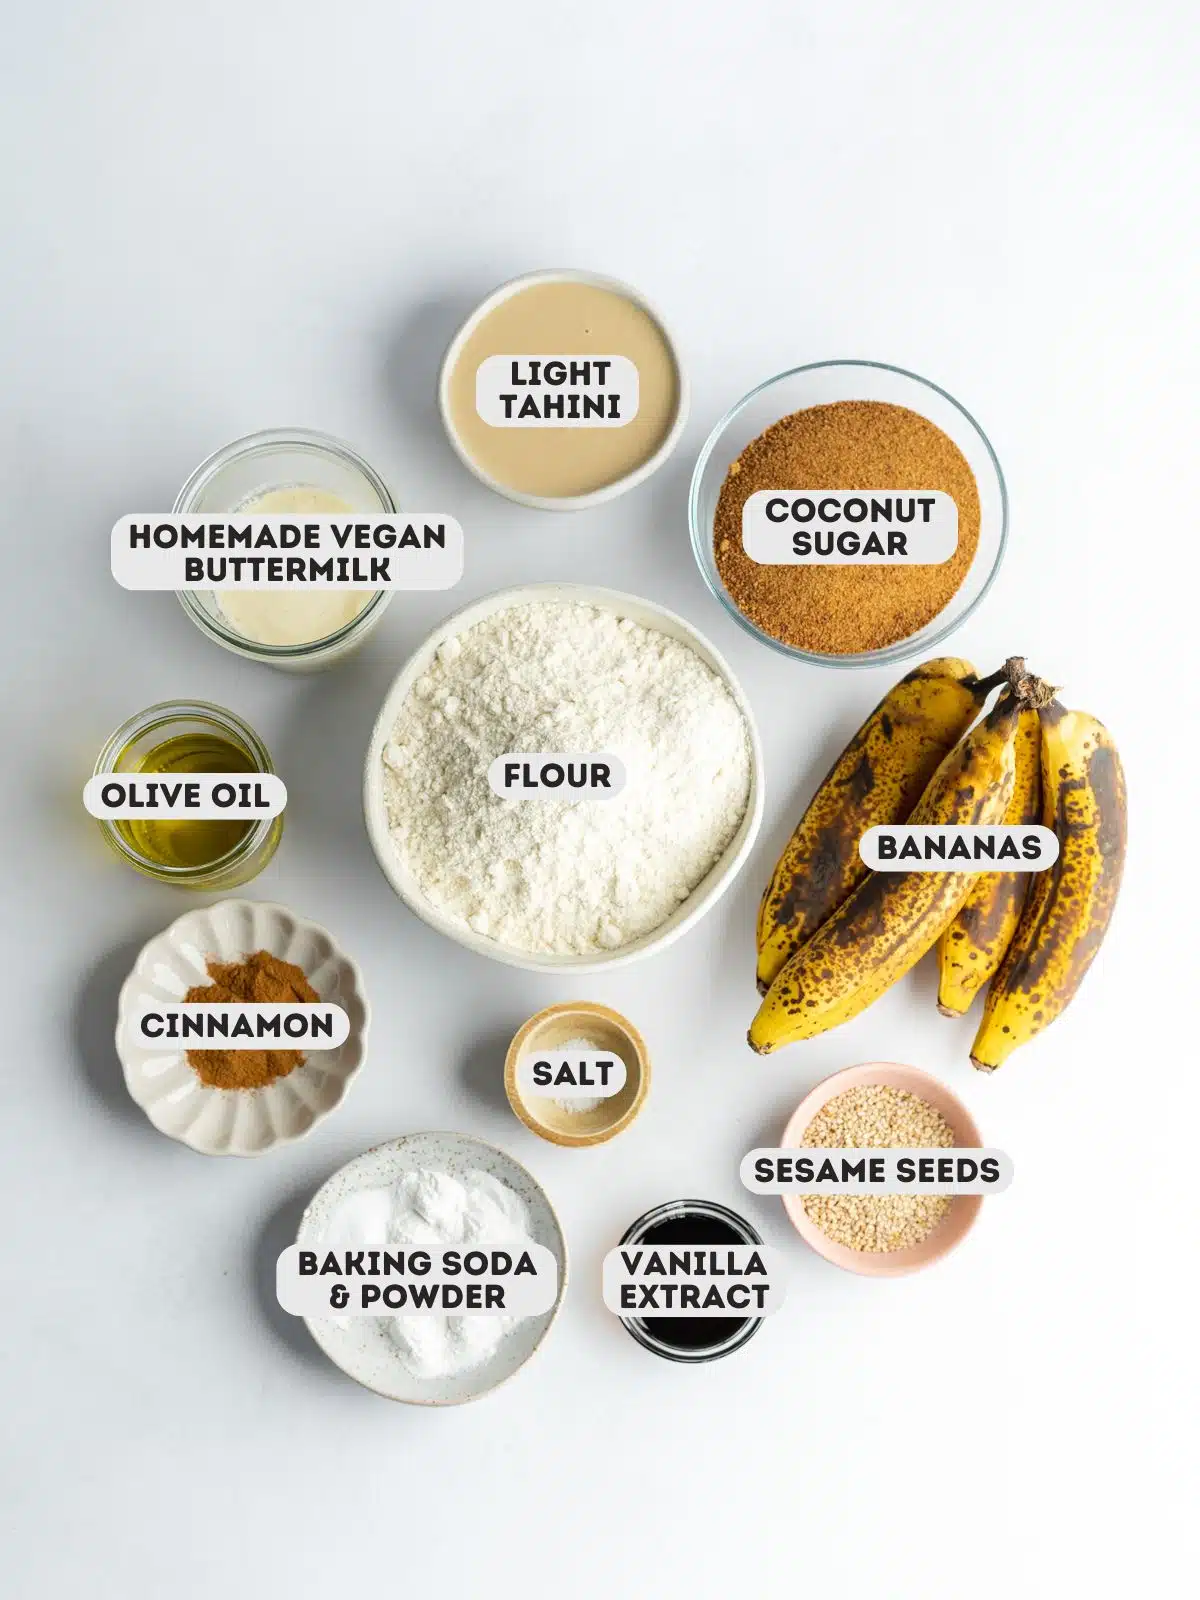 ingredients to make vegan tahini banana bread measured out in bowls on a gray surface.